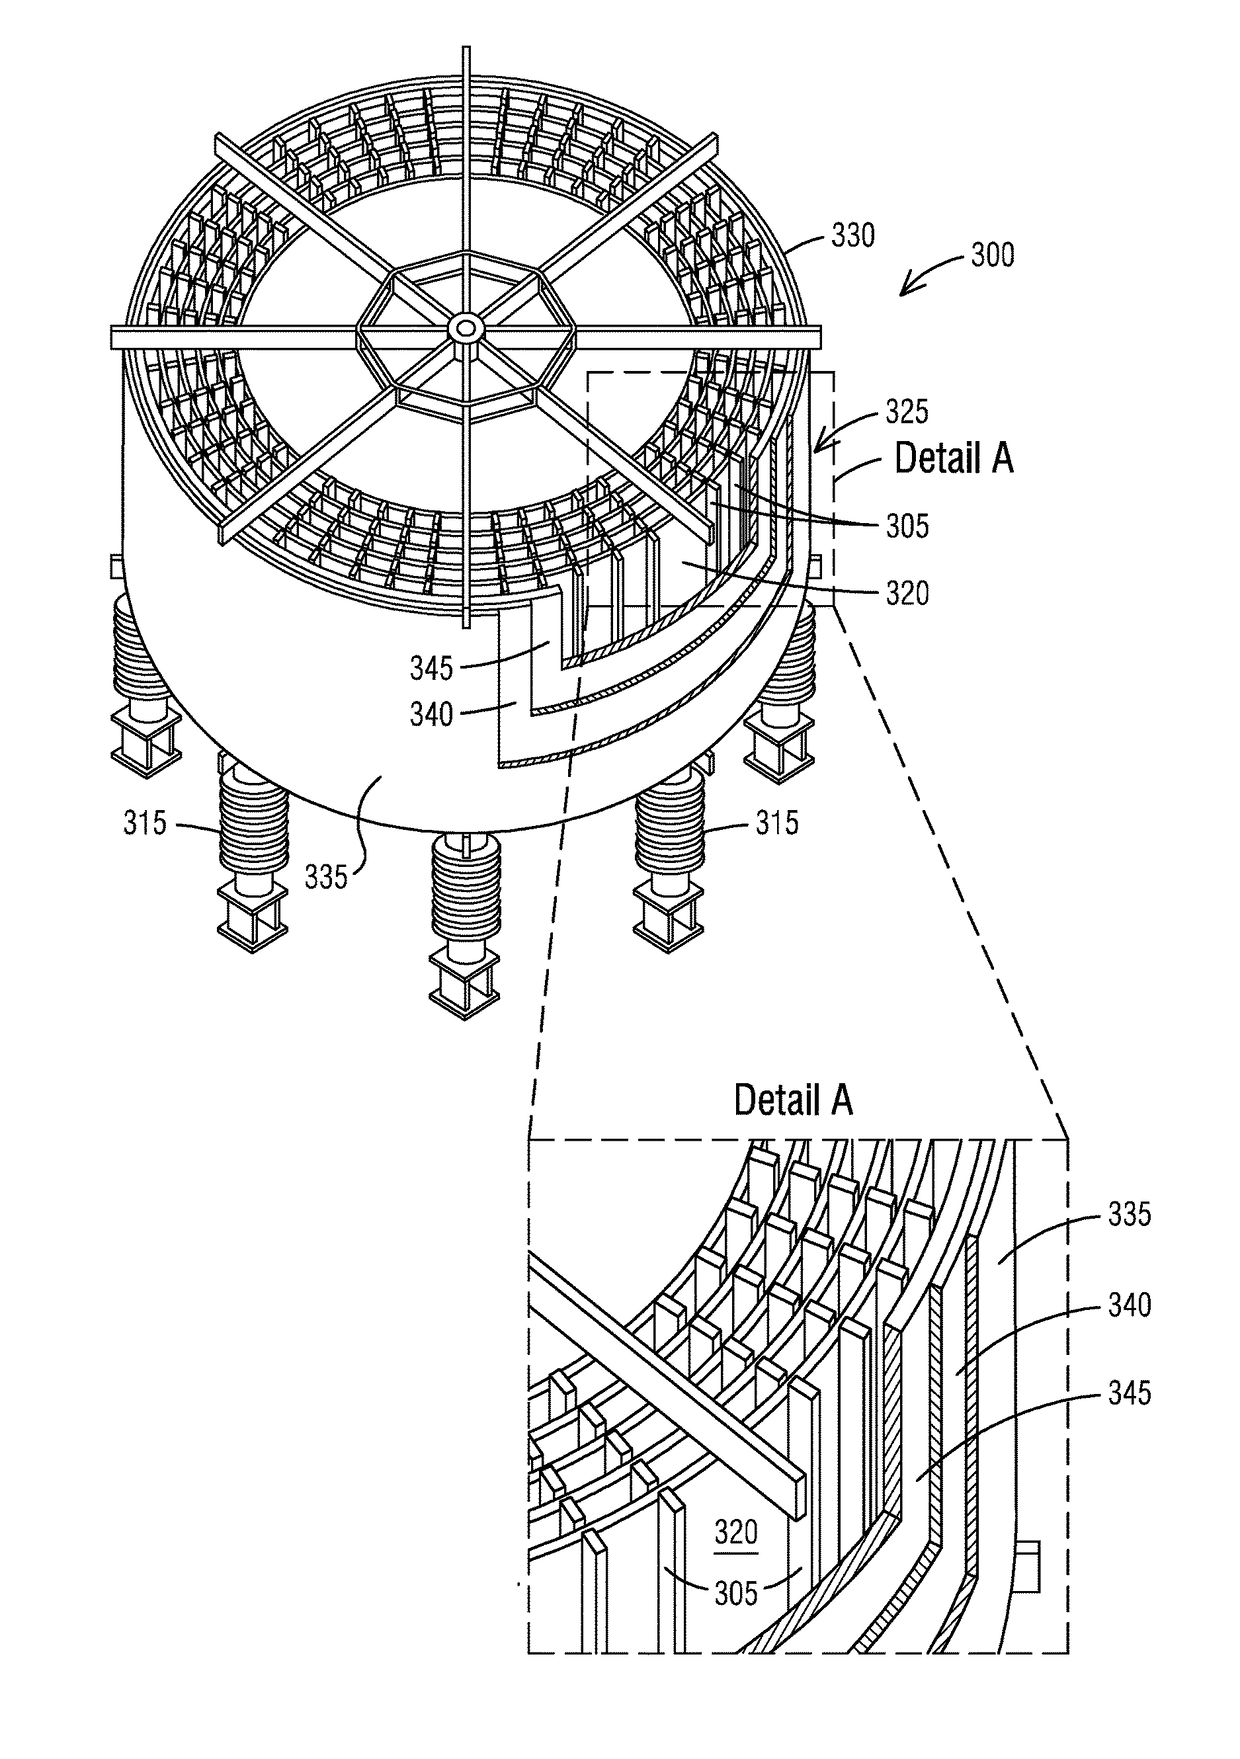 Intergrated barrier for protecting the coil of air core reactor from projectile attack